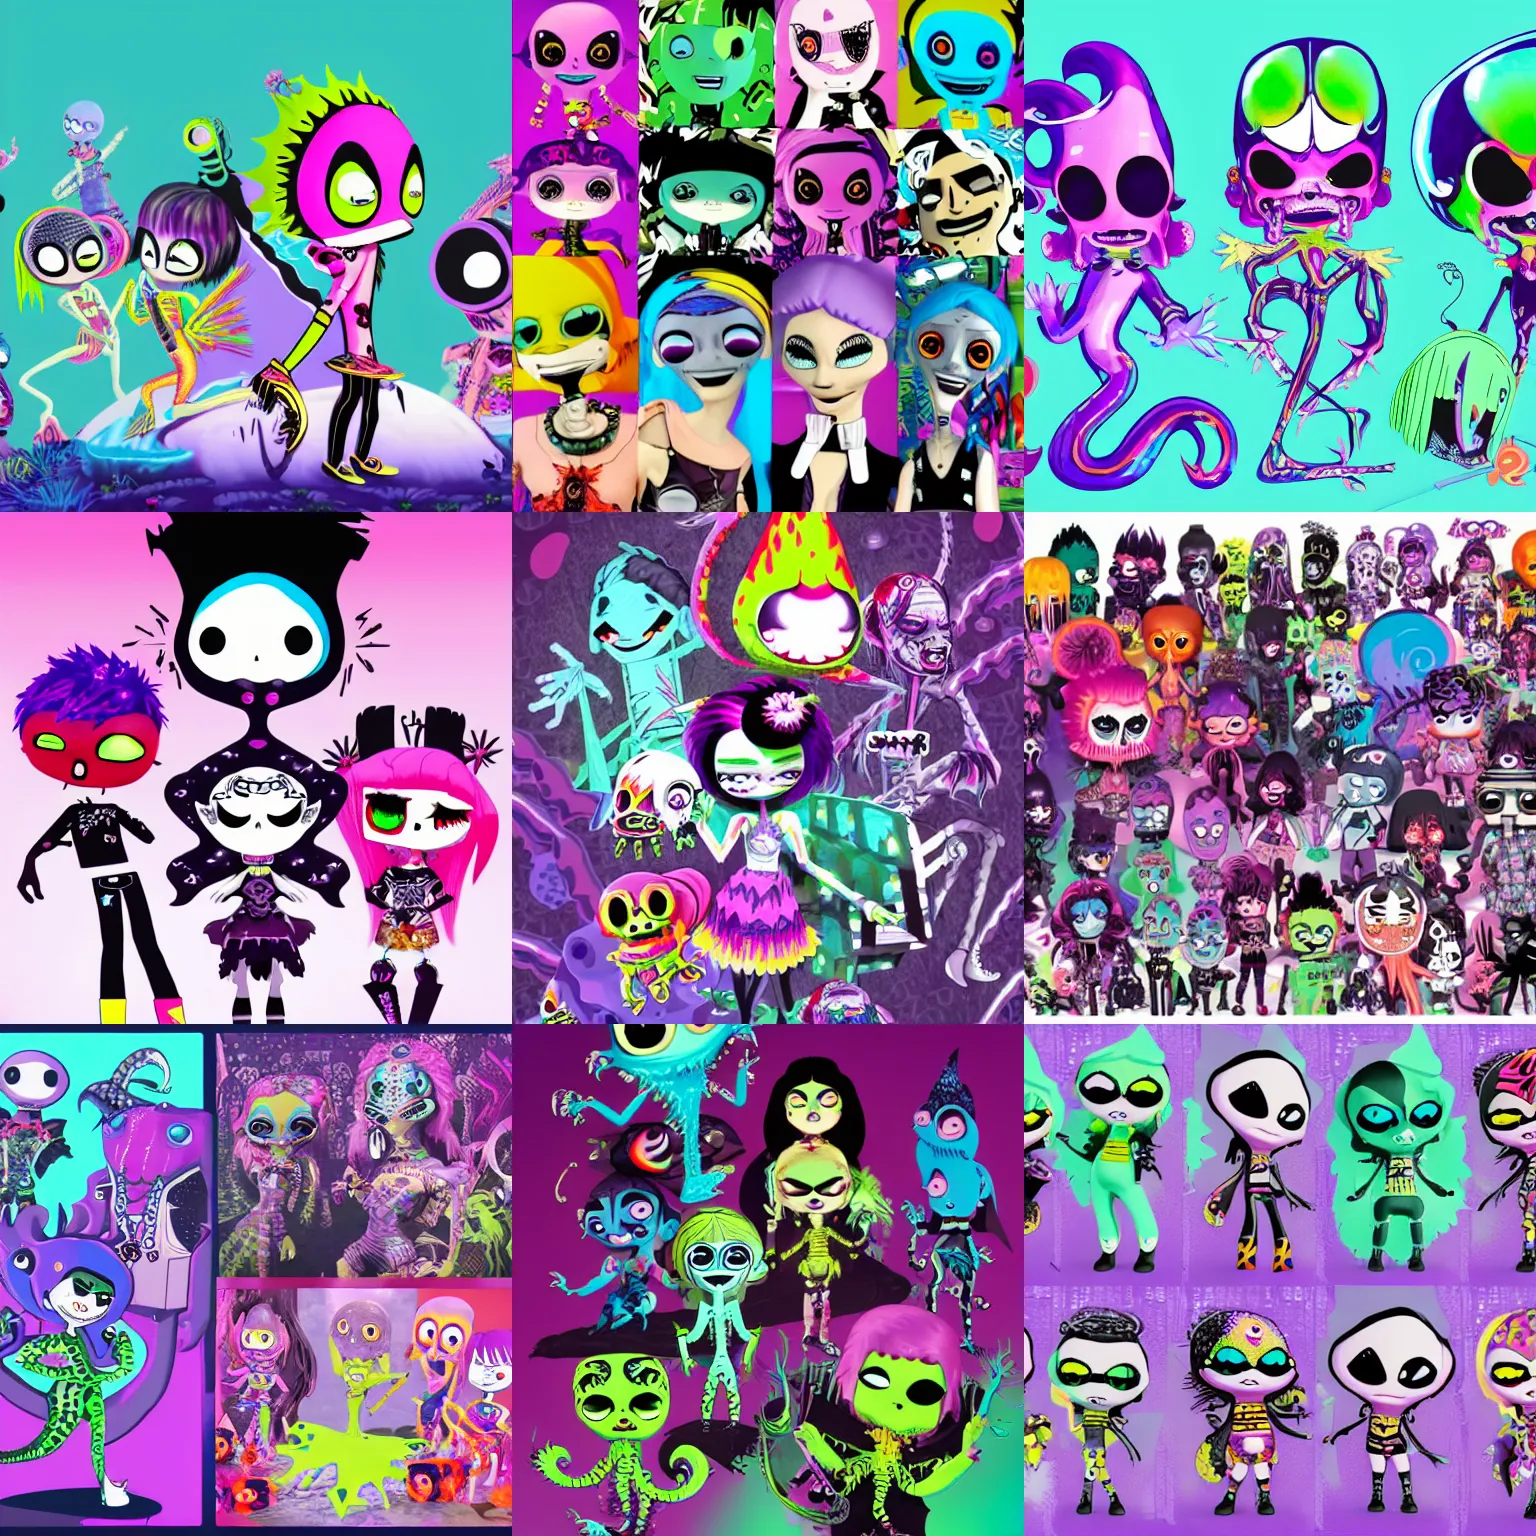 Prompt: CGI lisa frank gothic punk vampiric rockstar underwater vampiric anthropomorphic squid character designs of various shapes and sizes by genndy tartakovsky and ruby gloom by martin hsu and the creators of fret nice and Jamie Hewlett from gorillaz and tim shafer from doublefine for a splatoon video game by nintendo